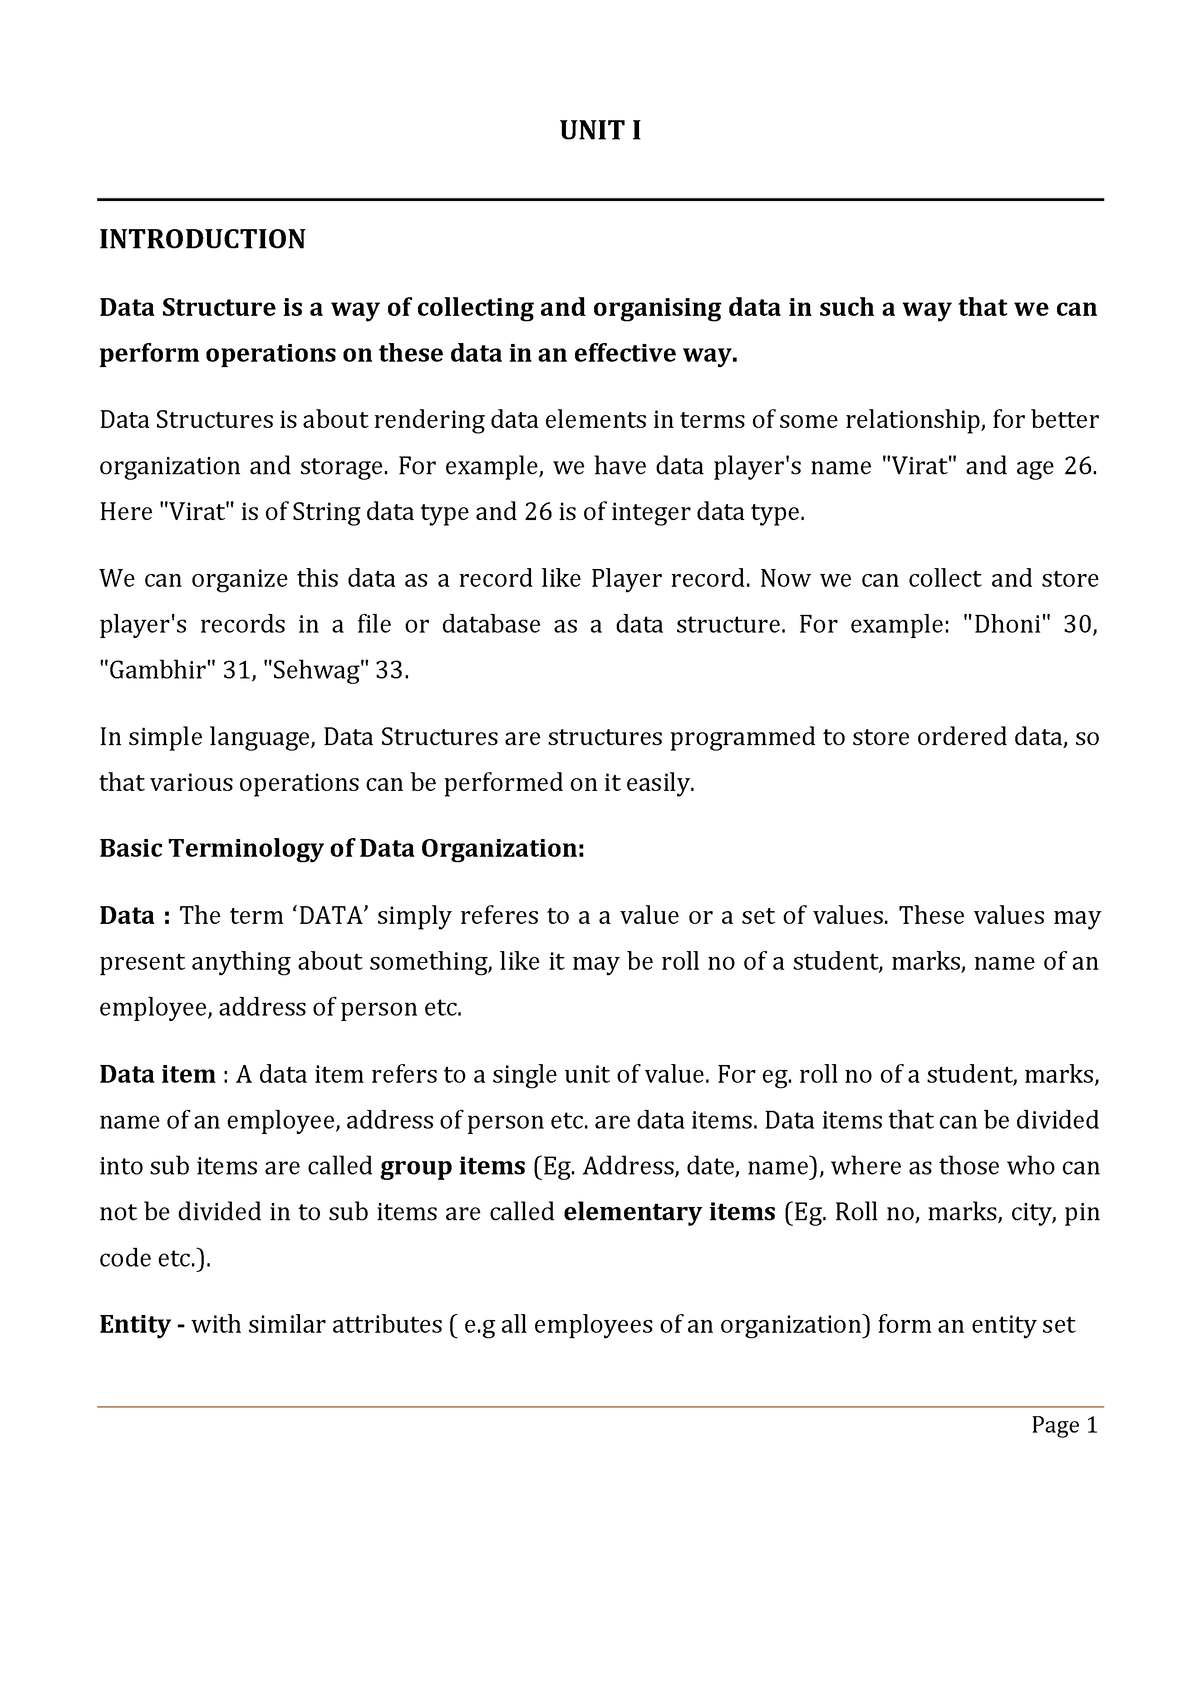 data structures research paper topics